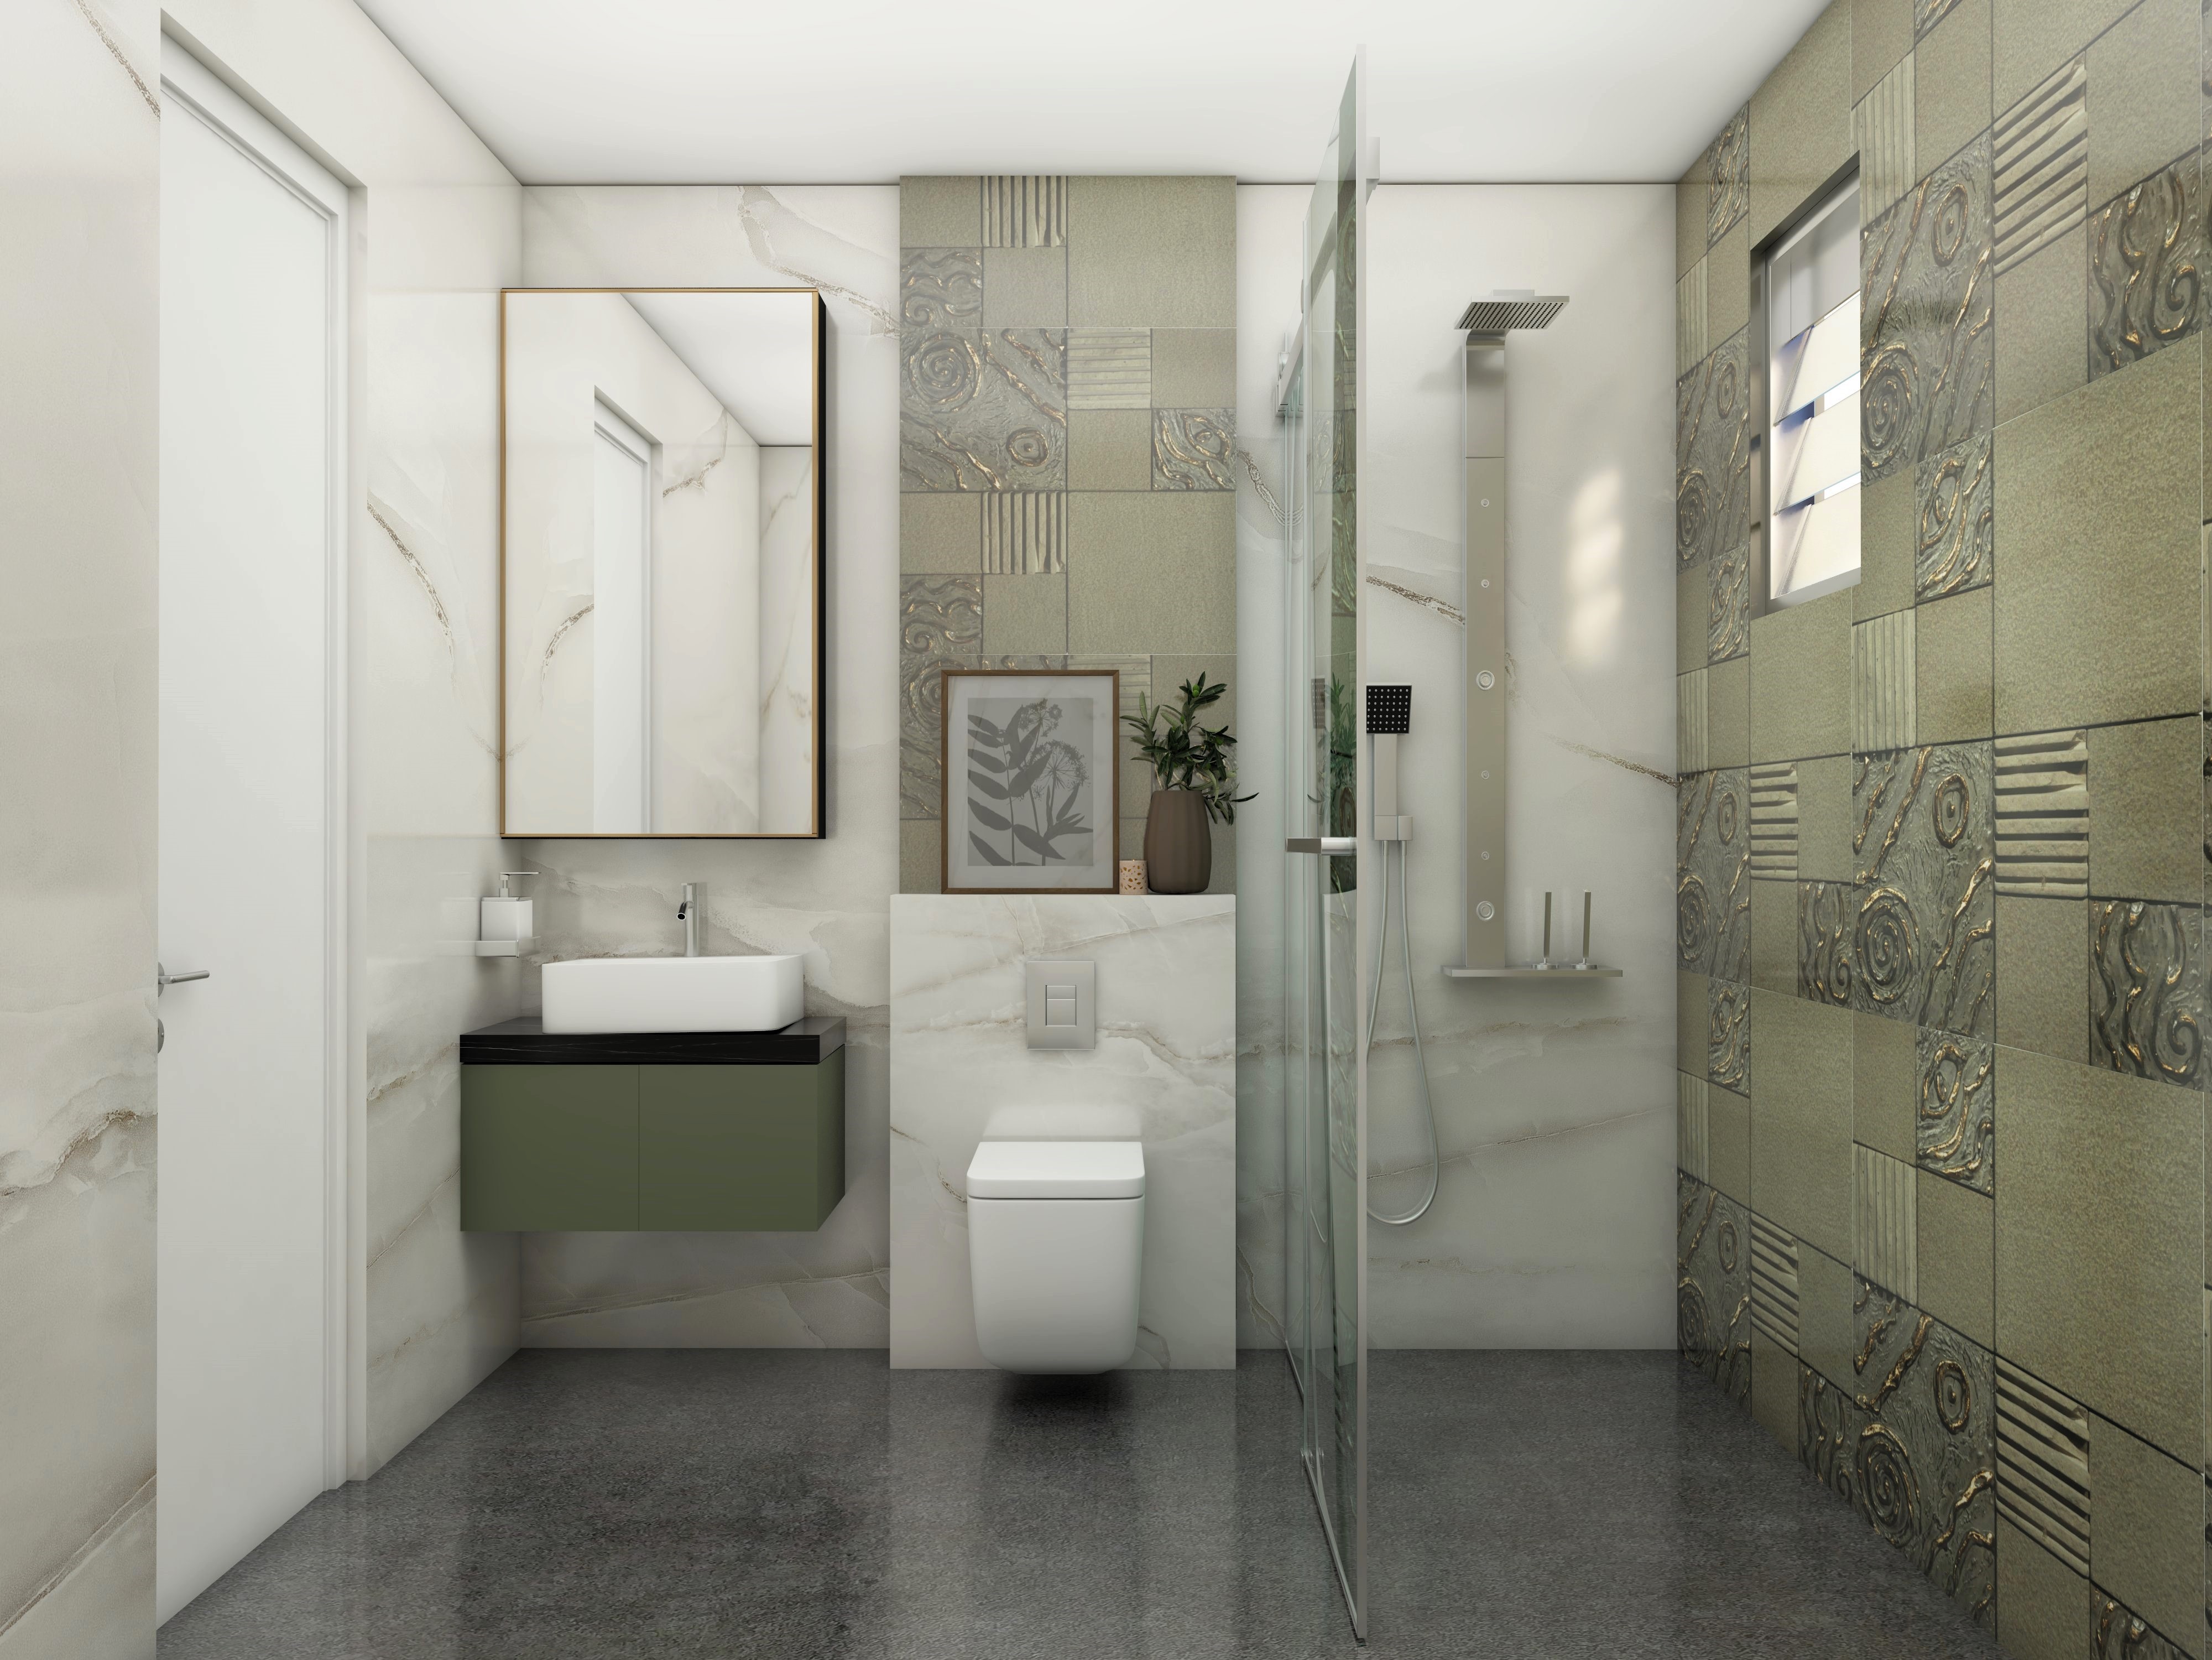 Bathroom walls with white marble and olive green 3d tiles - Beautiful Homes